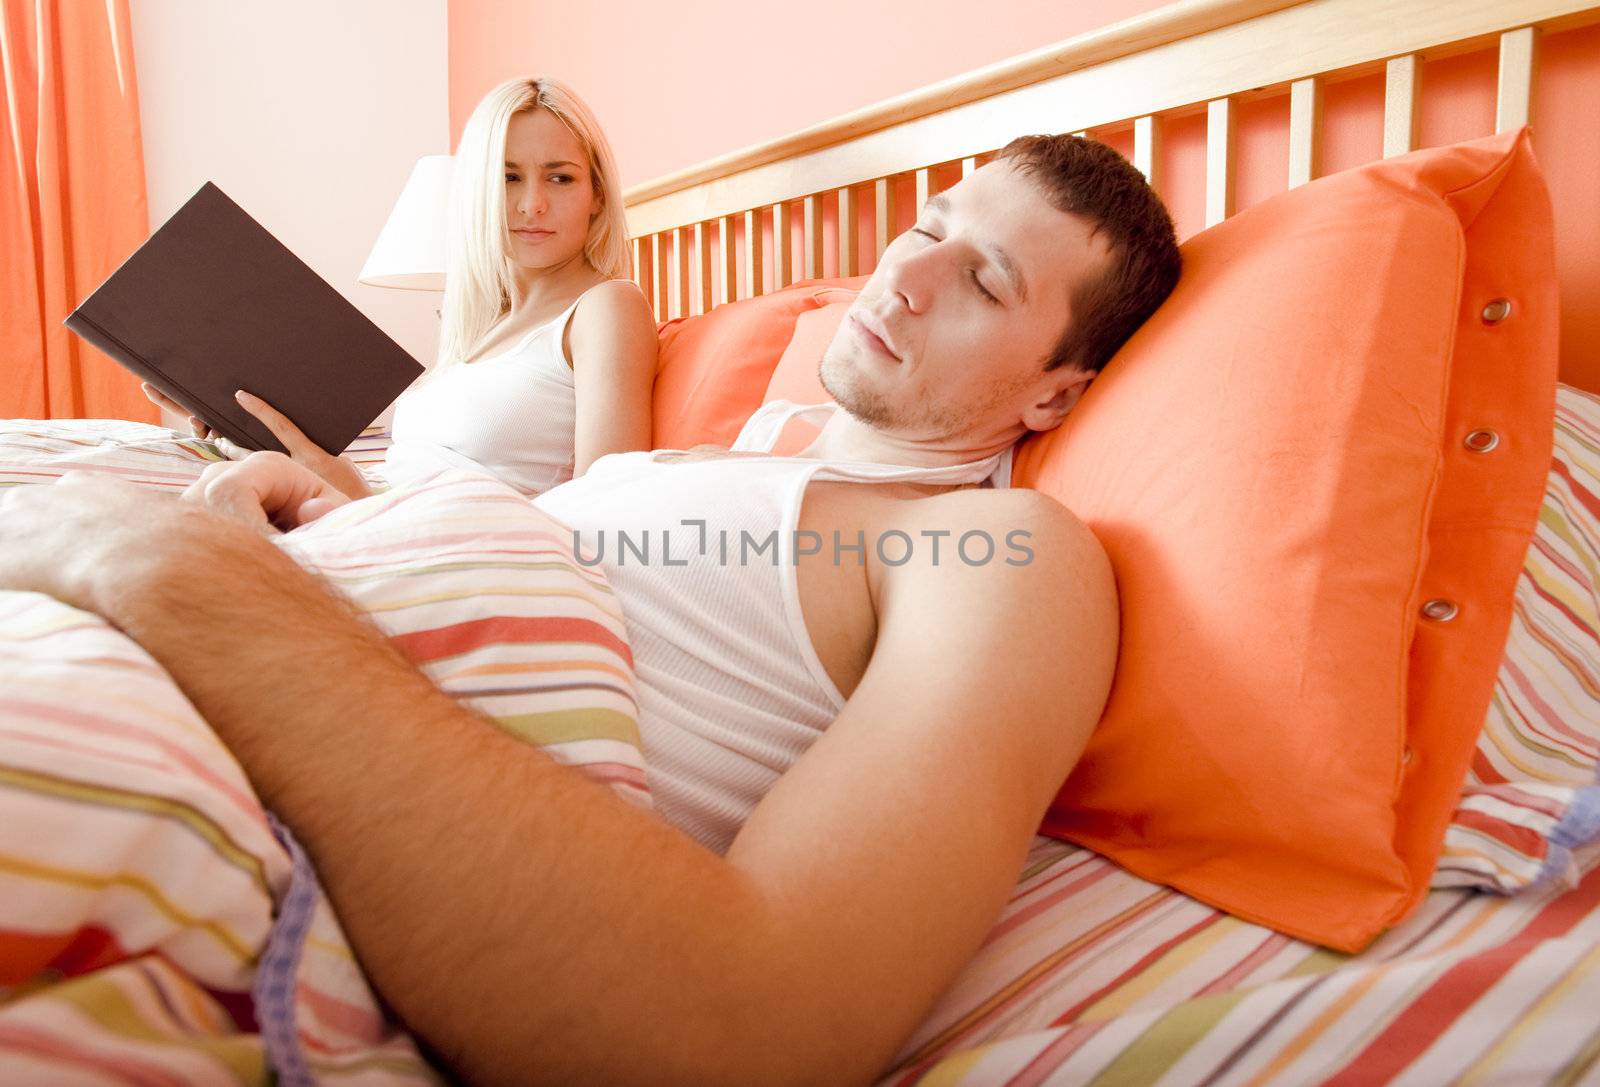 Woman holds book and watches man sleeping next to her. Horizontal format.